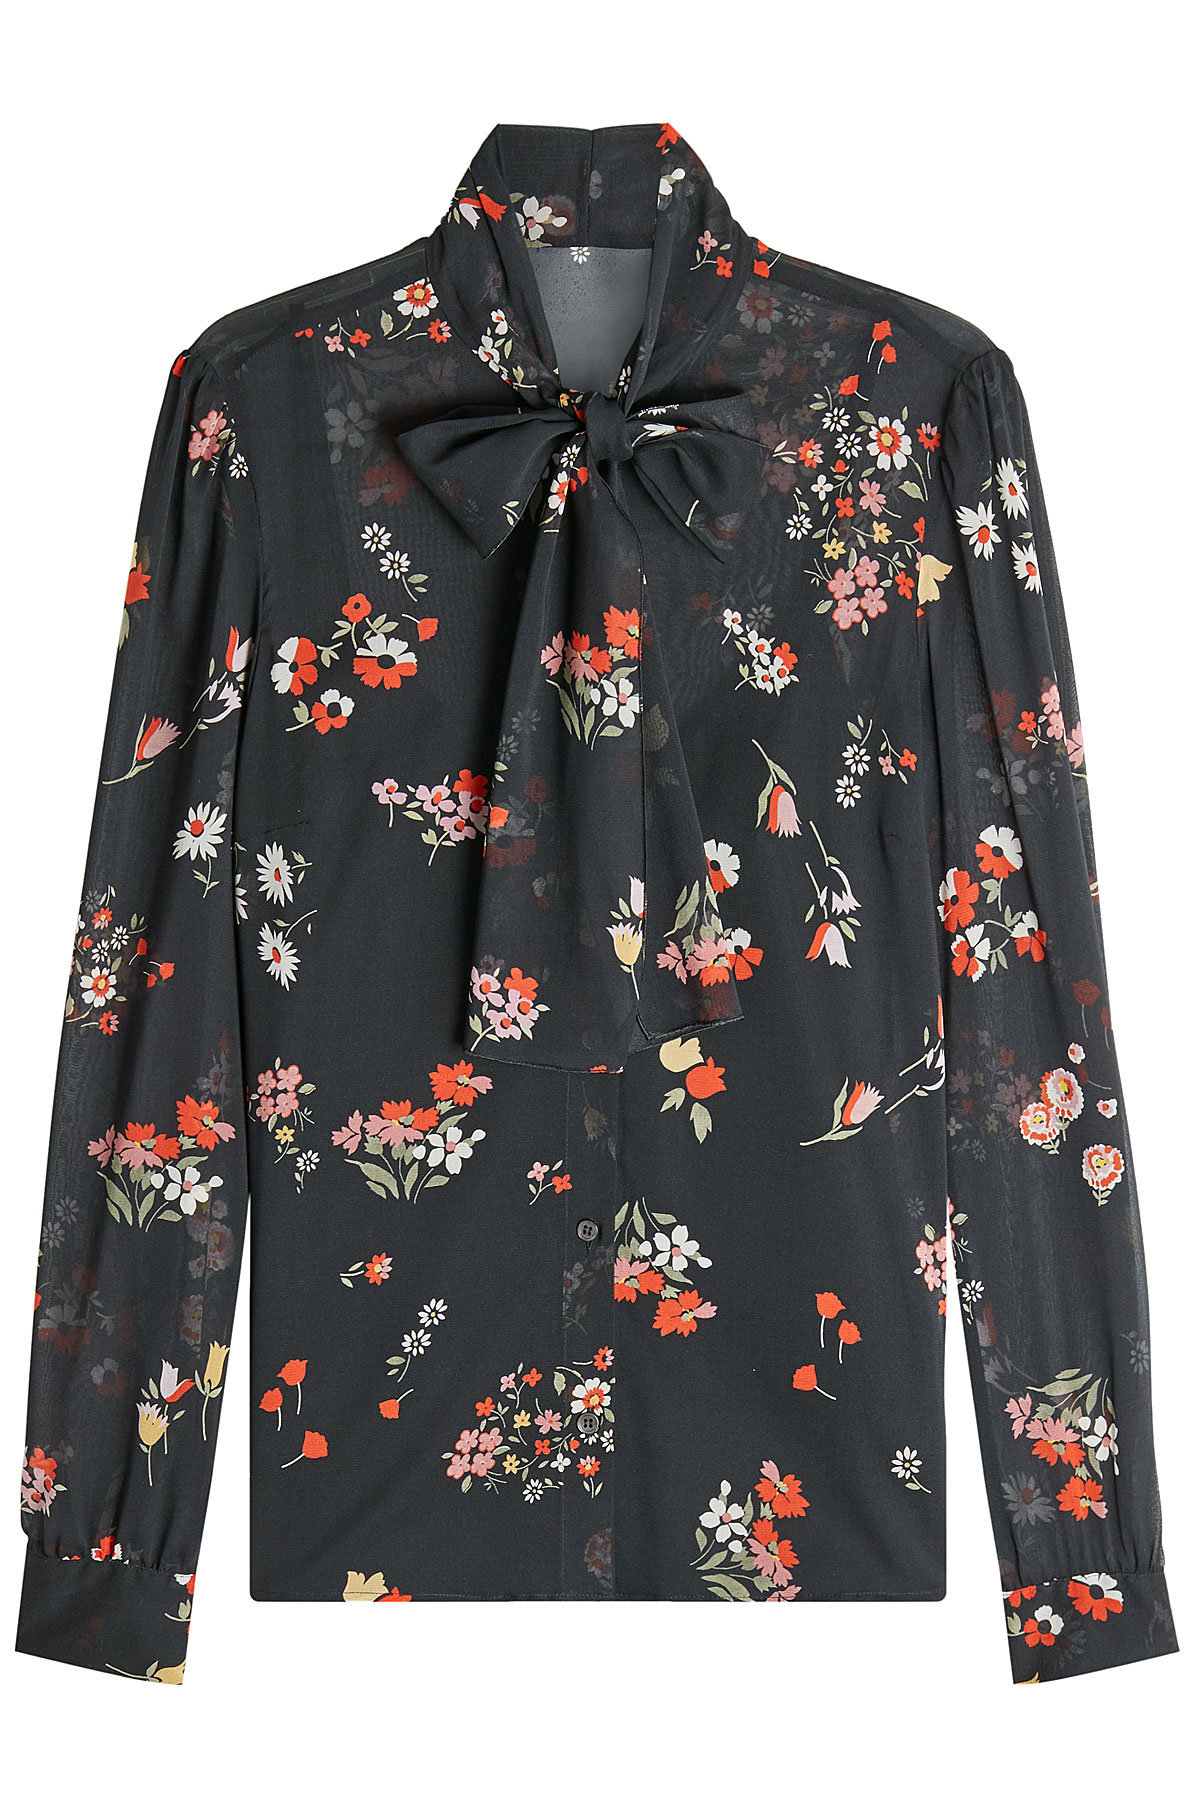 Red Valentino - Pussy-Bow Printed Silk Blouse